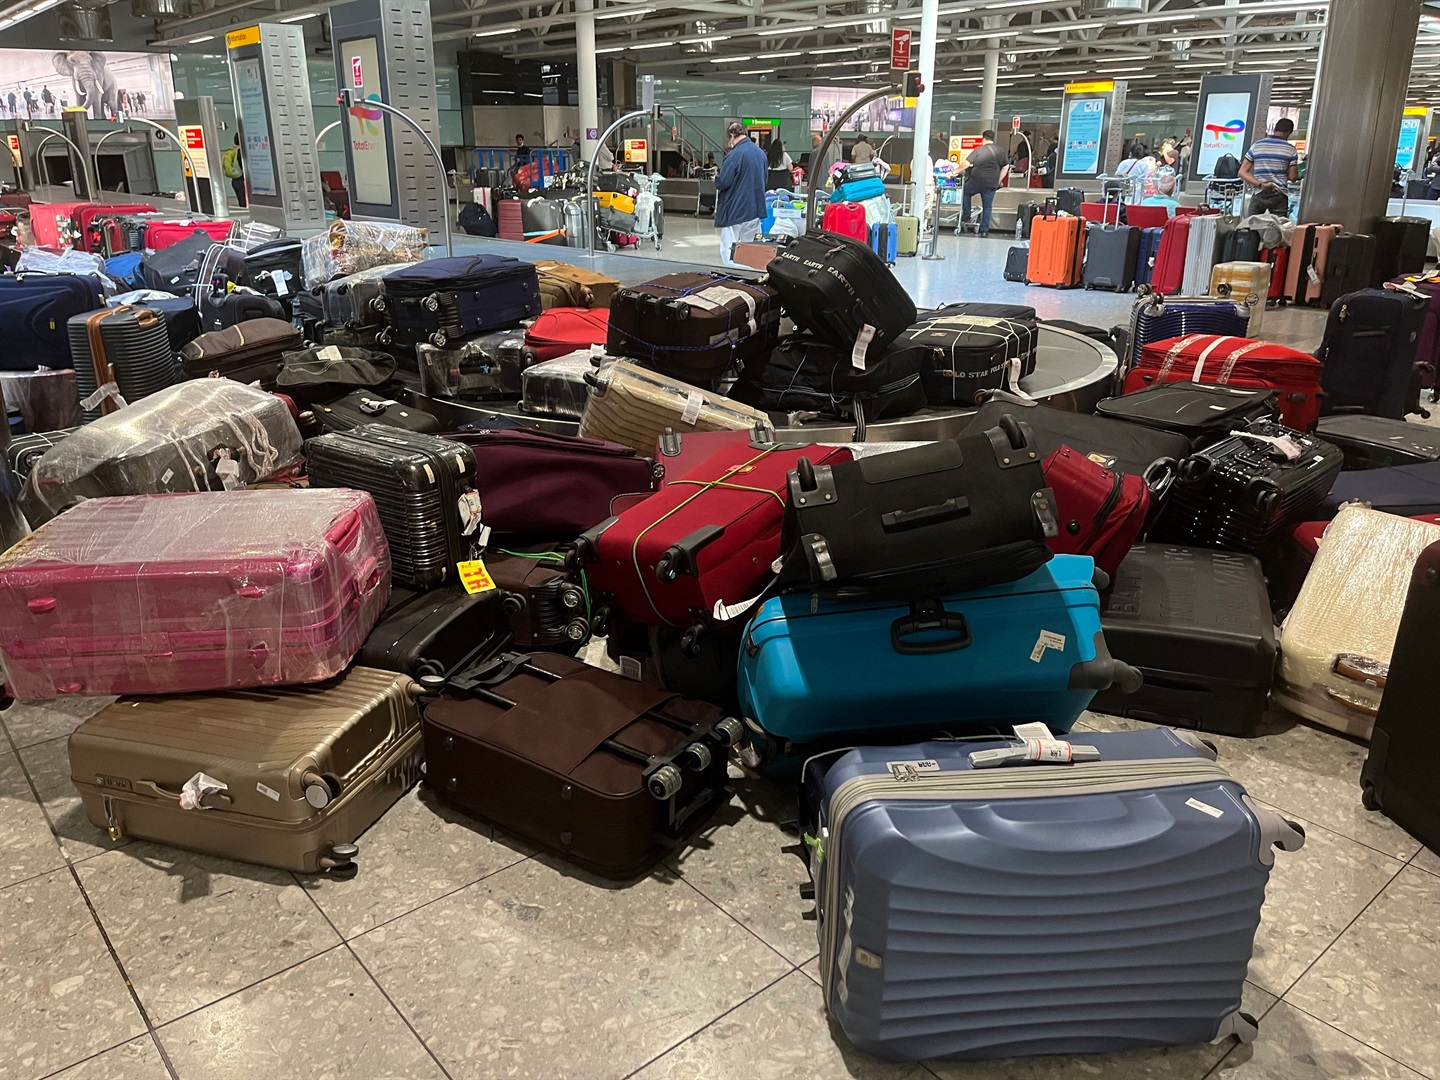 Uncollected suitcases at London Heathrow Airport on July 8, 2022. Paul Ellis/AFP/Getty Images